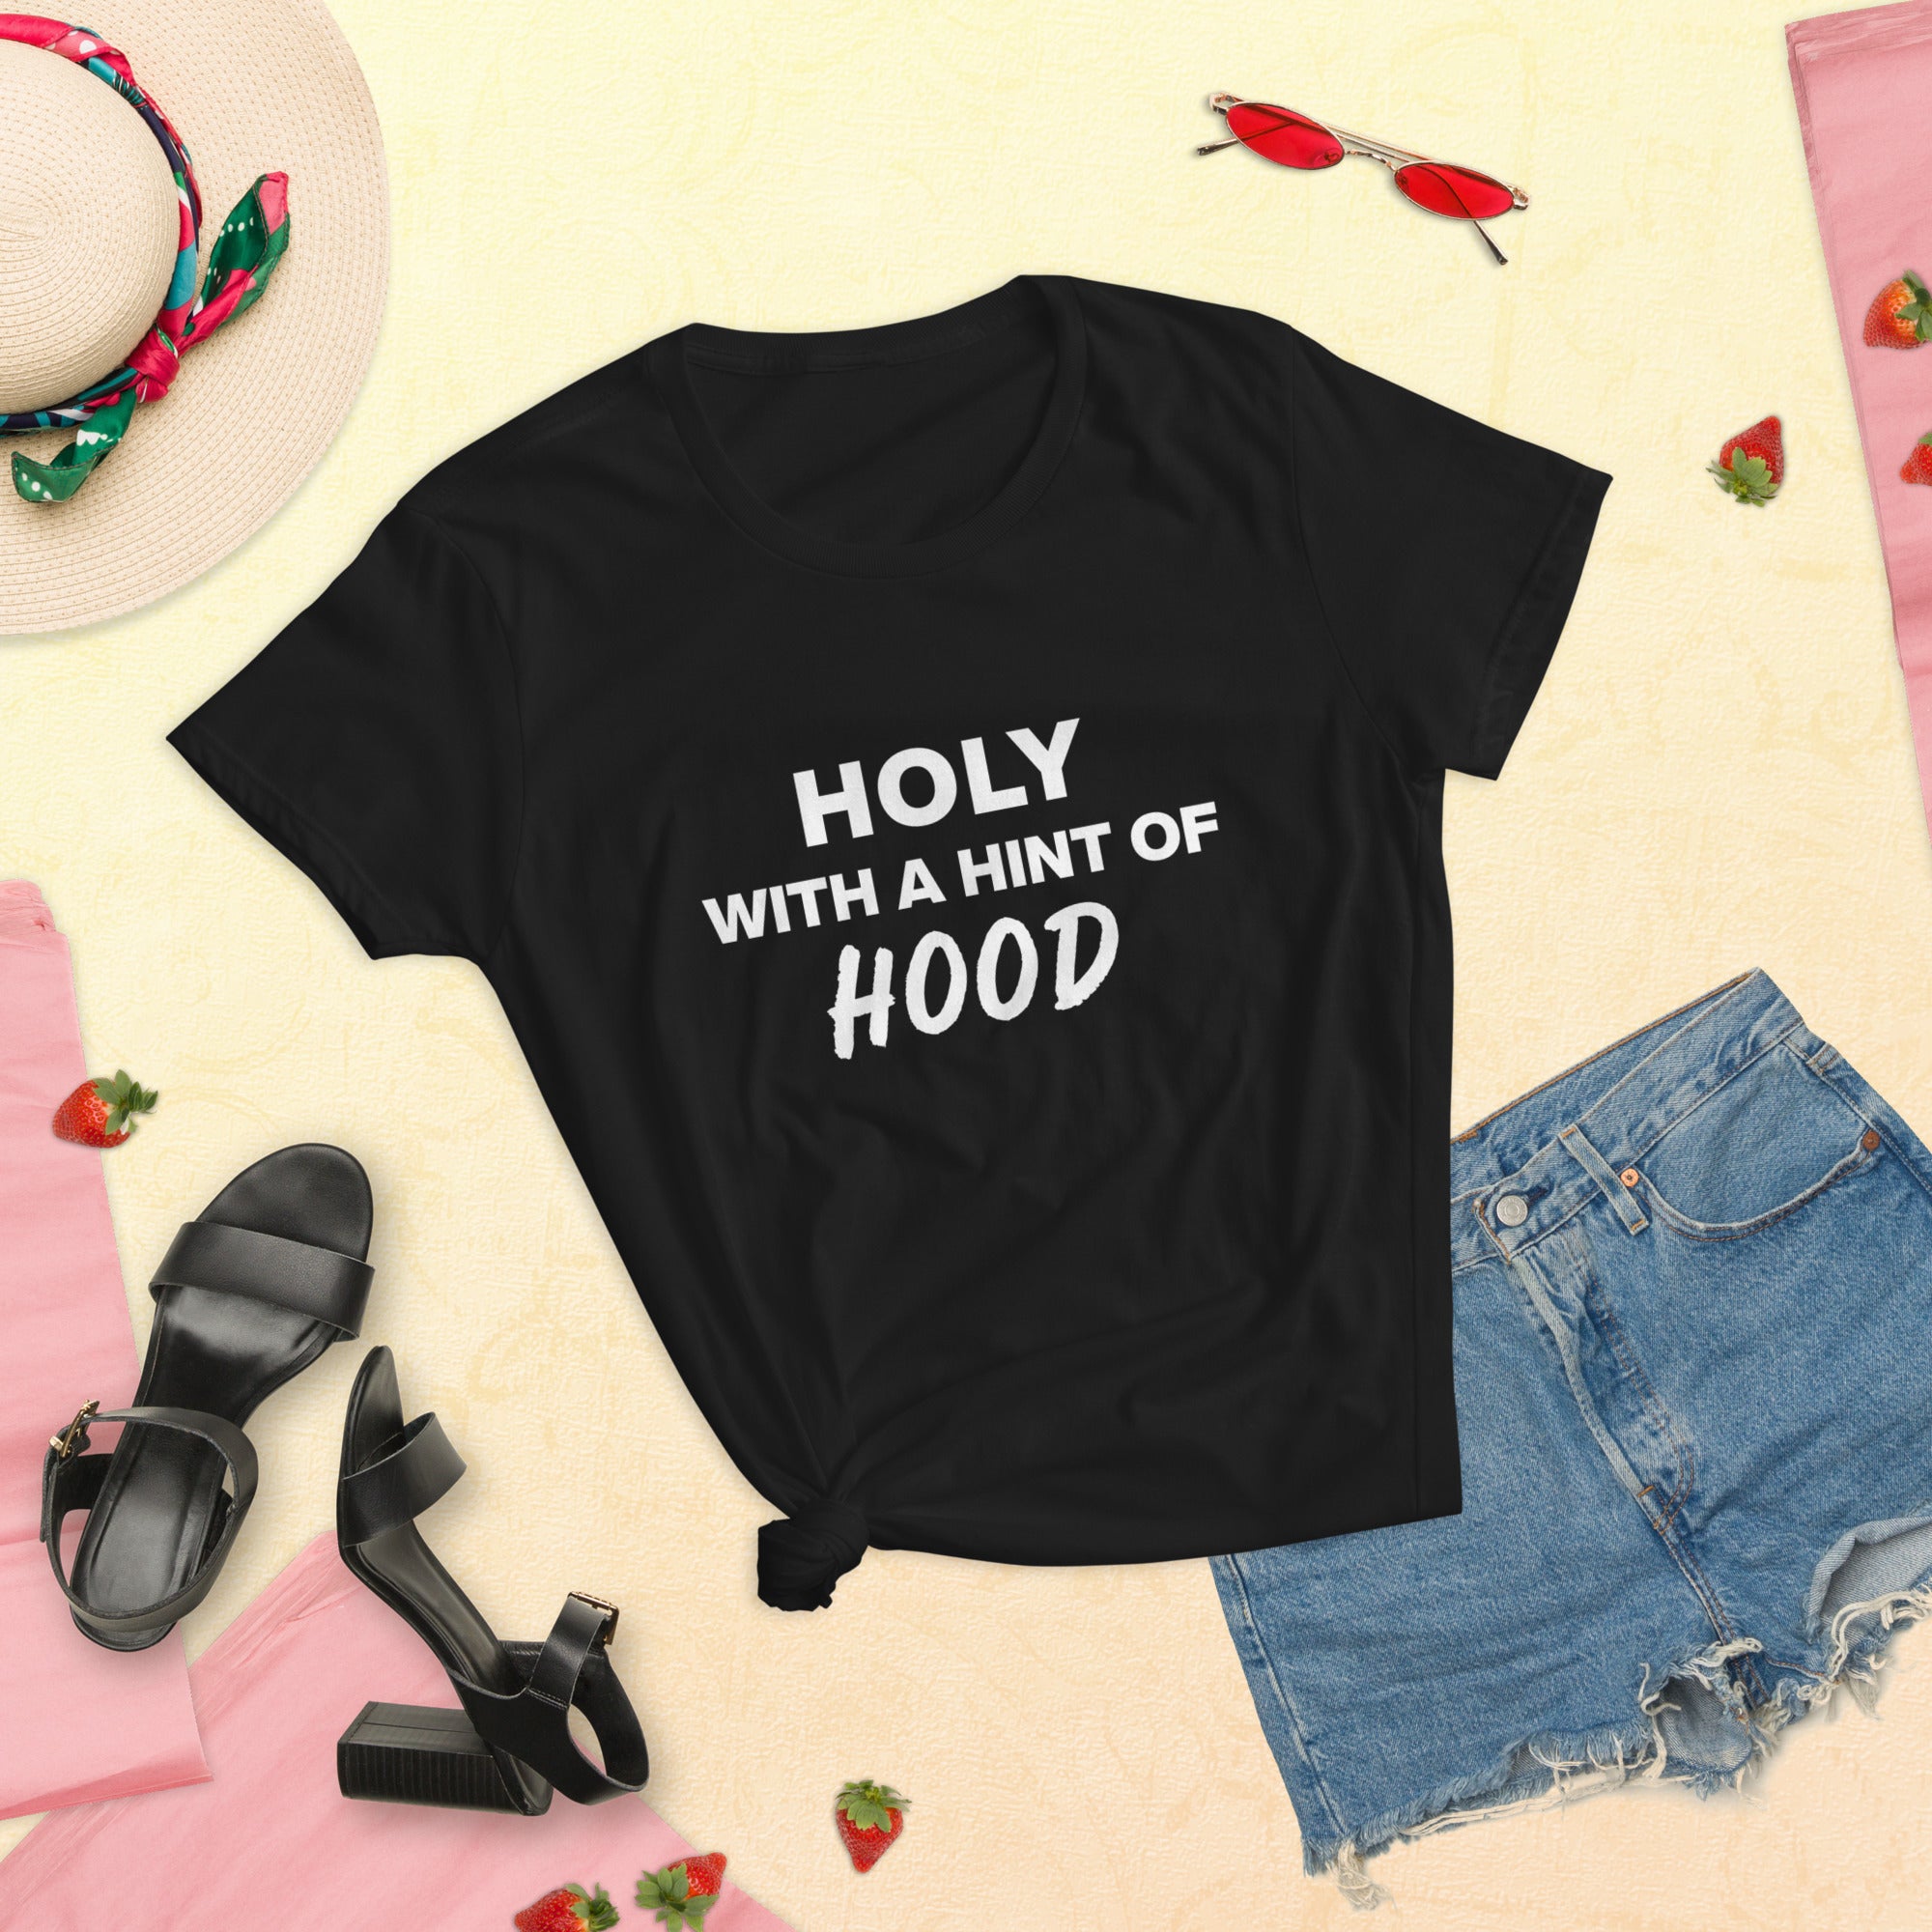 Holy with a Hint of Hood - Women's short sleeve t-shirt - Liners Gone Wild